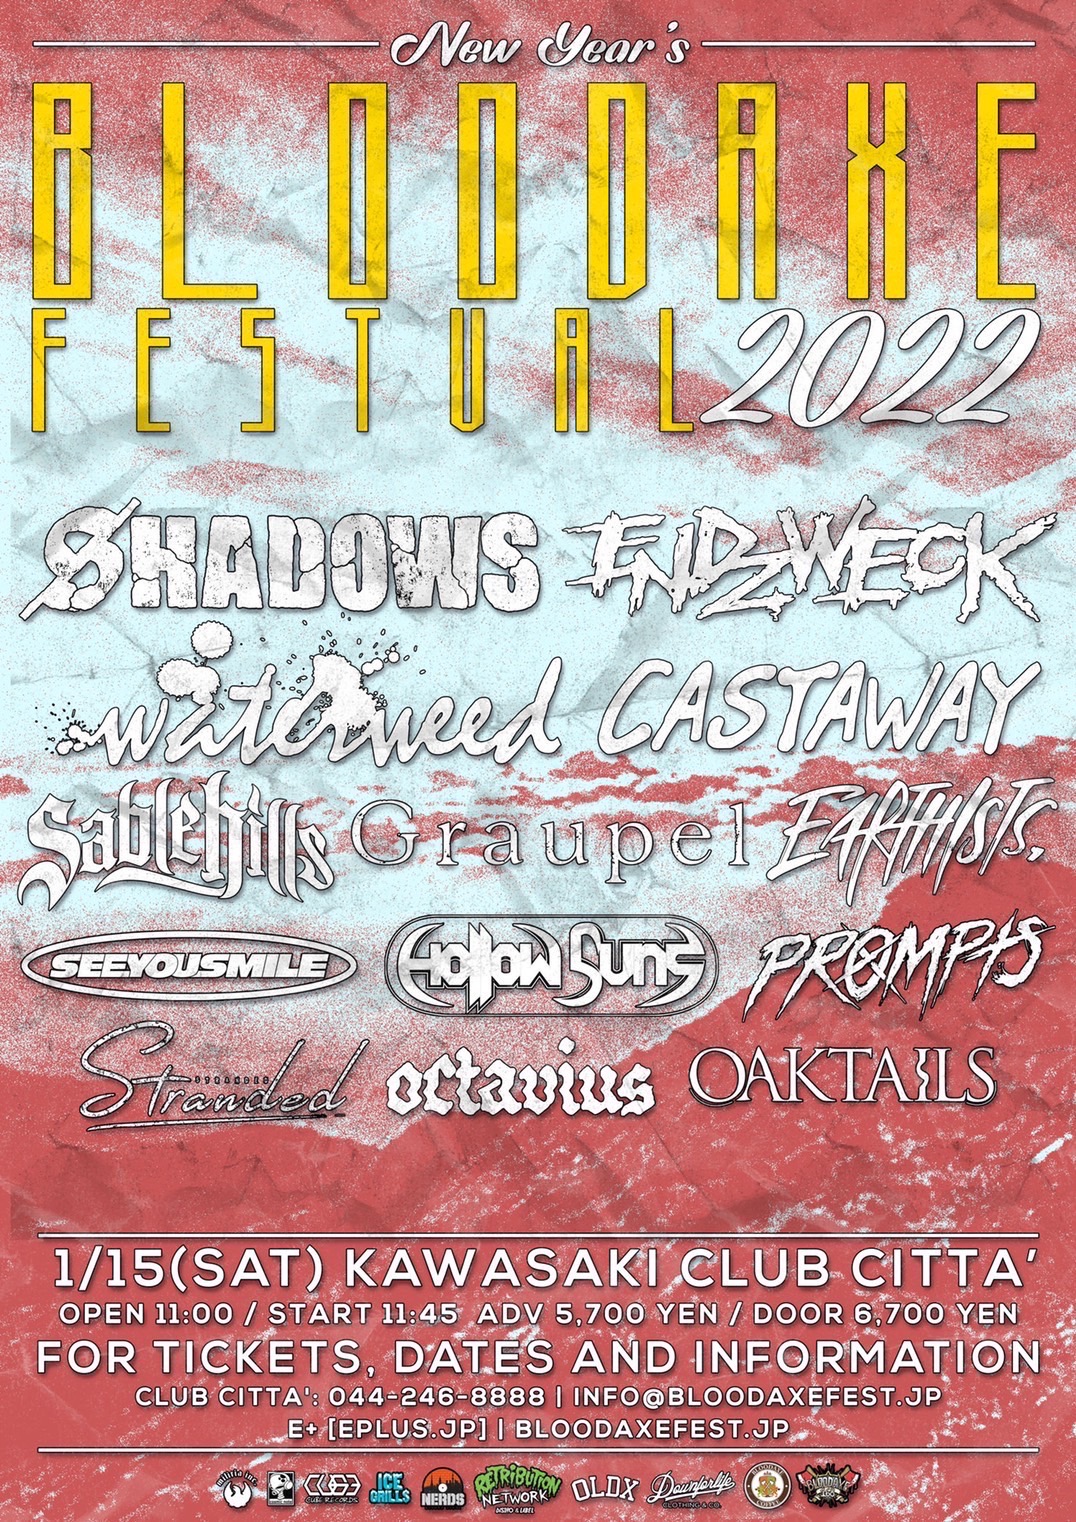 NEW YEAR'S BLOODAXE FESTIVAL 2022